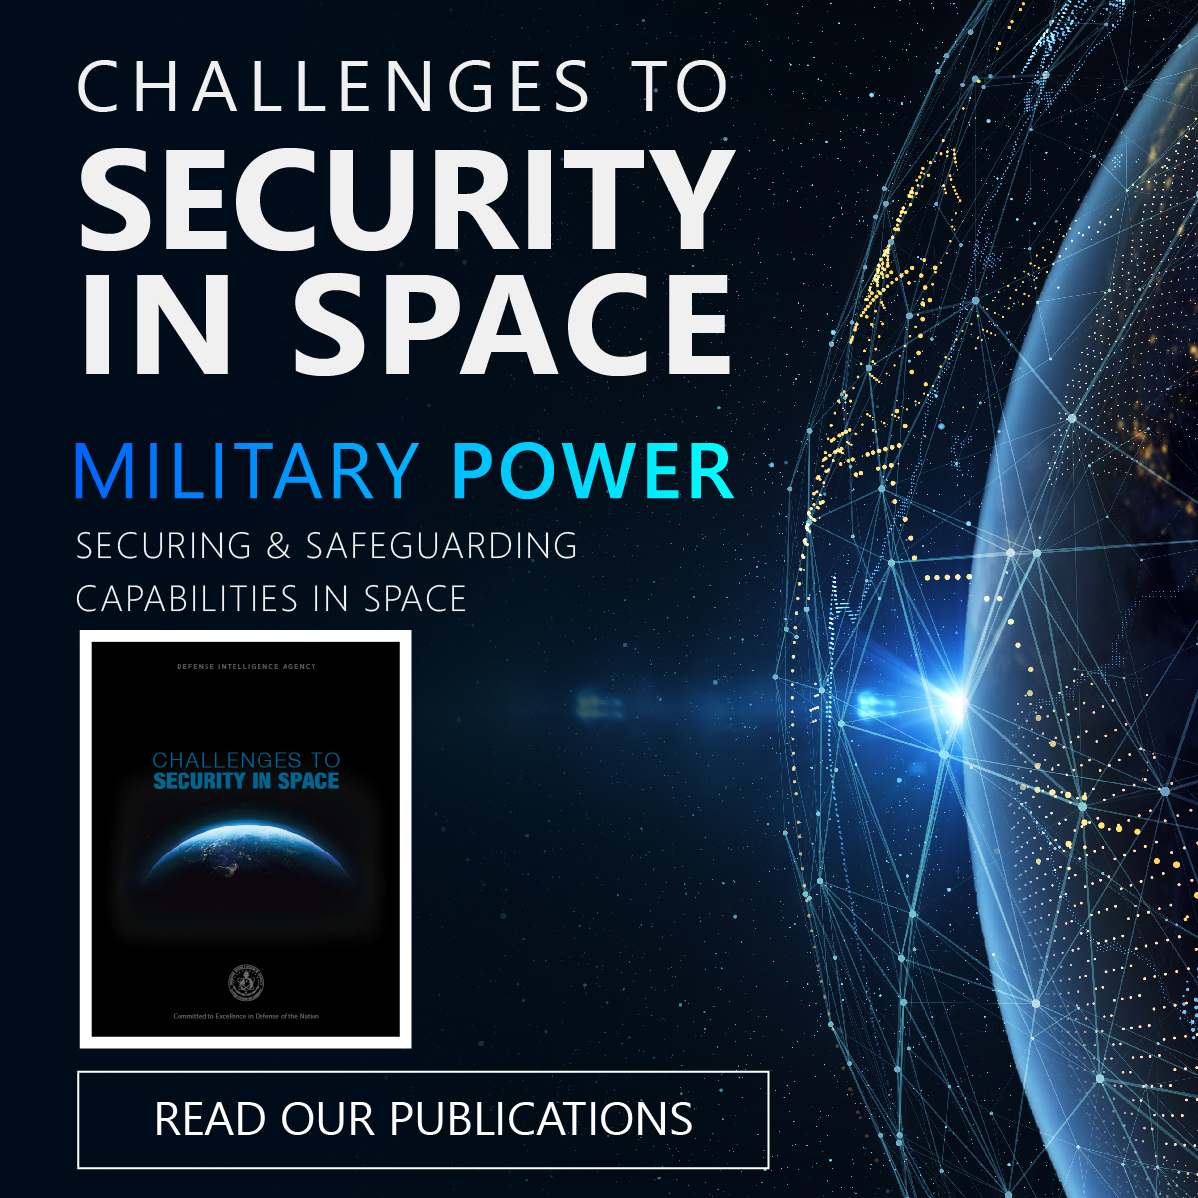 Feature image showing part of Earth with a graphical layer around with. Main title. Challenges to security in space. Military Power. Sub title. Securing and safeguarding capabilities in space. Read out publications